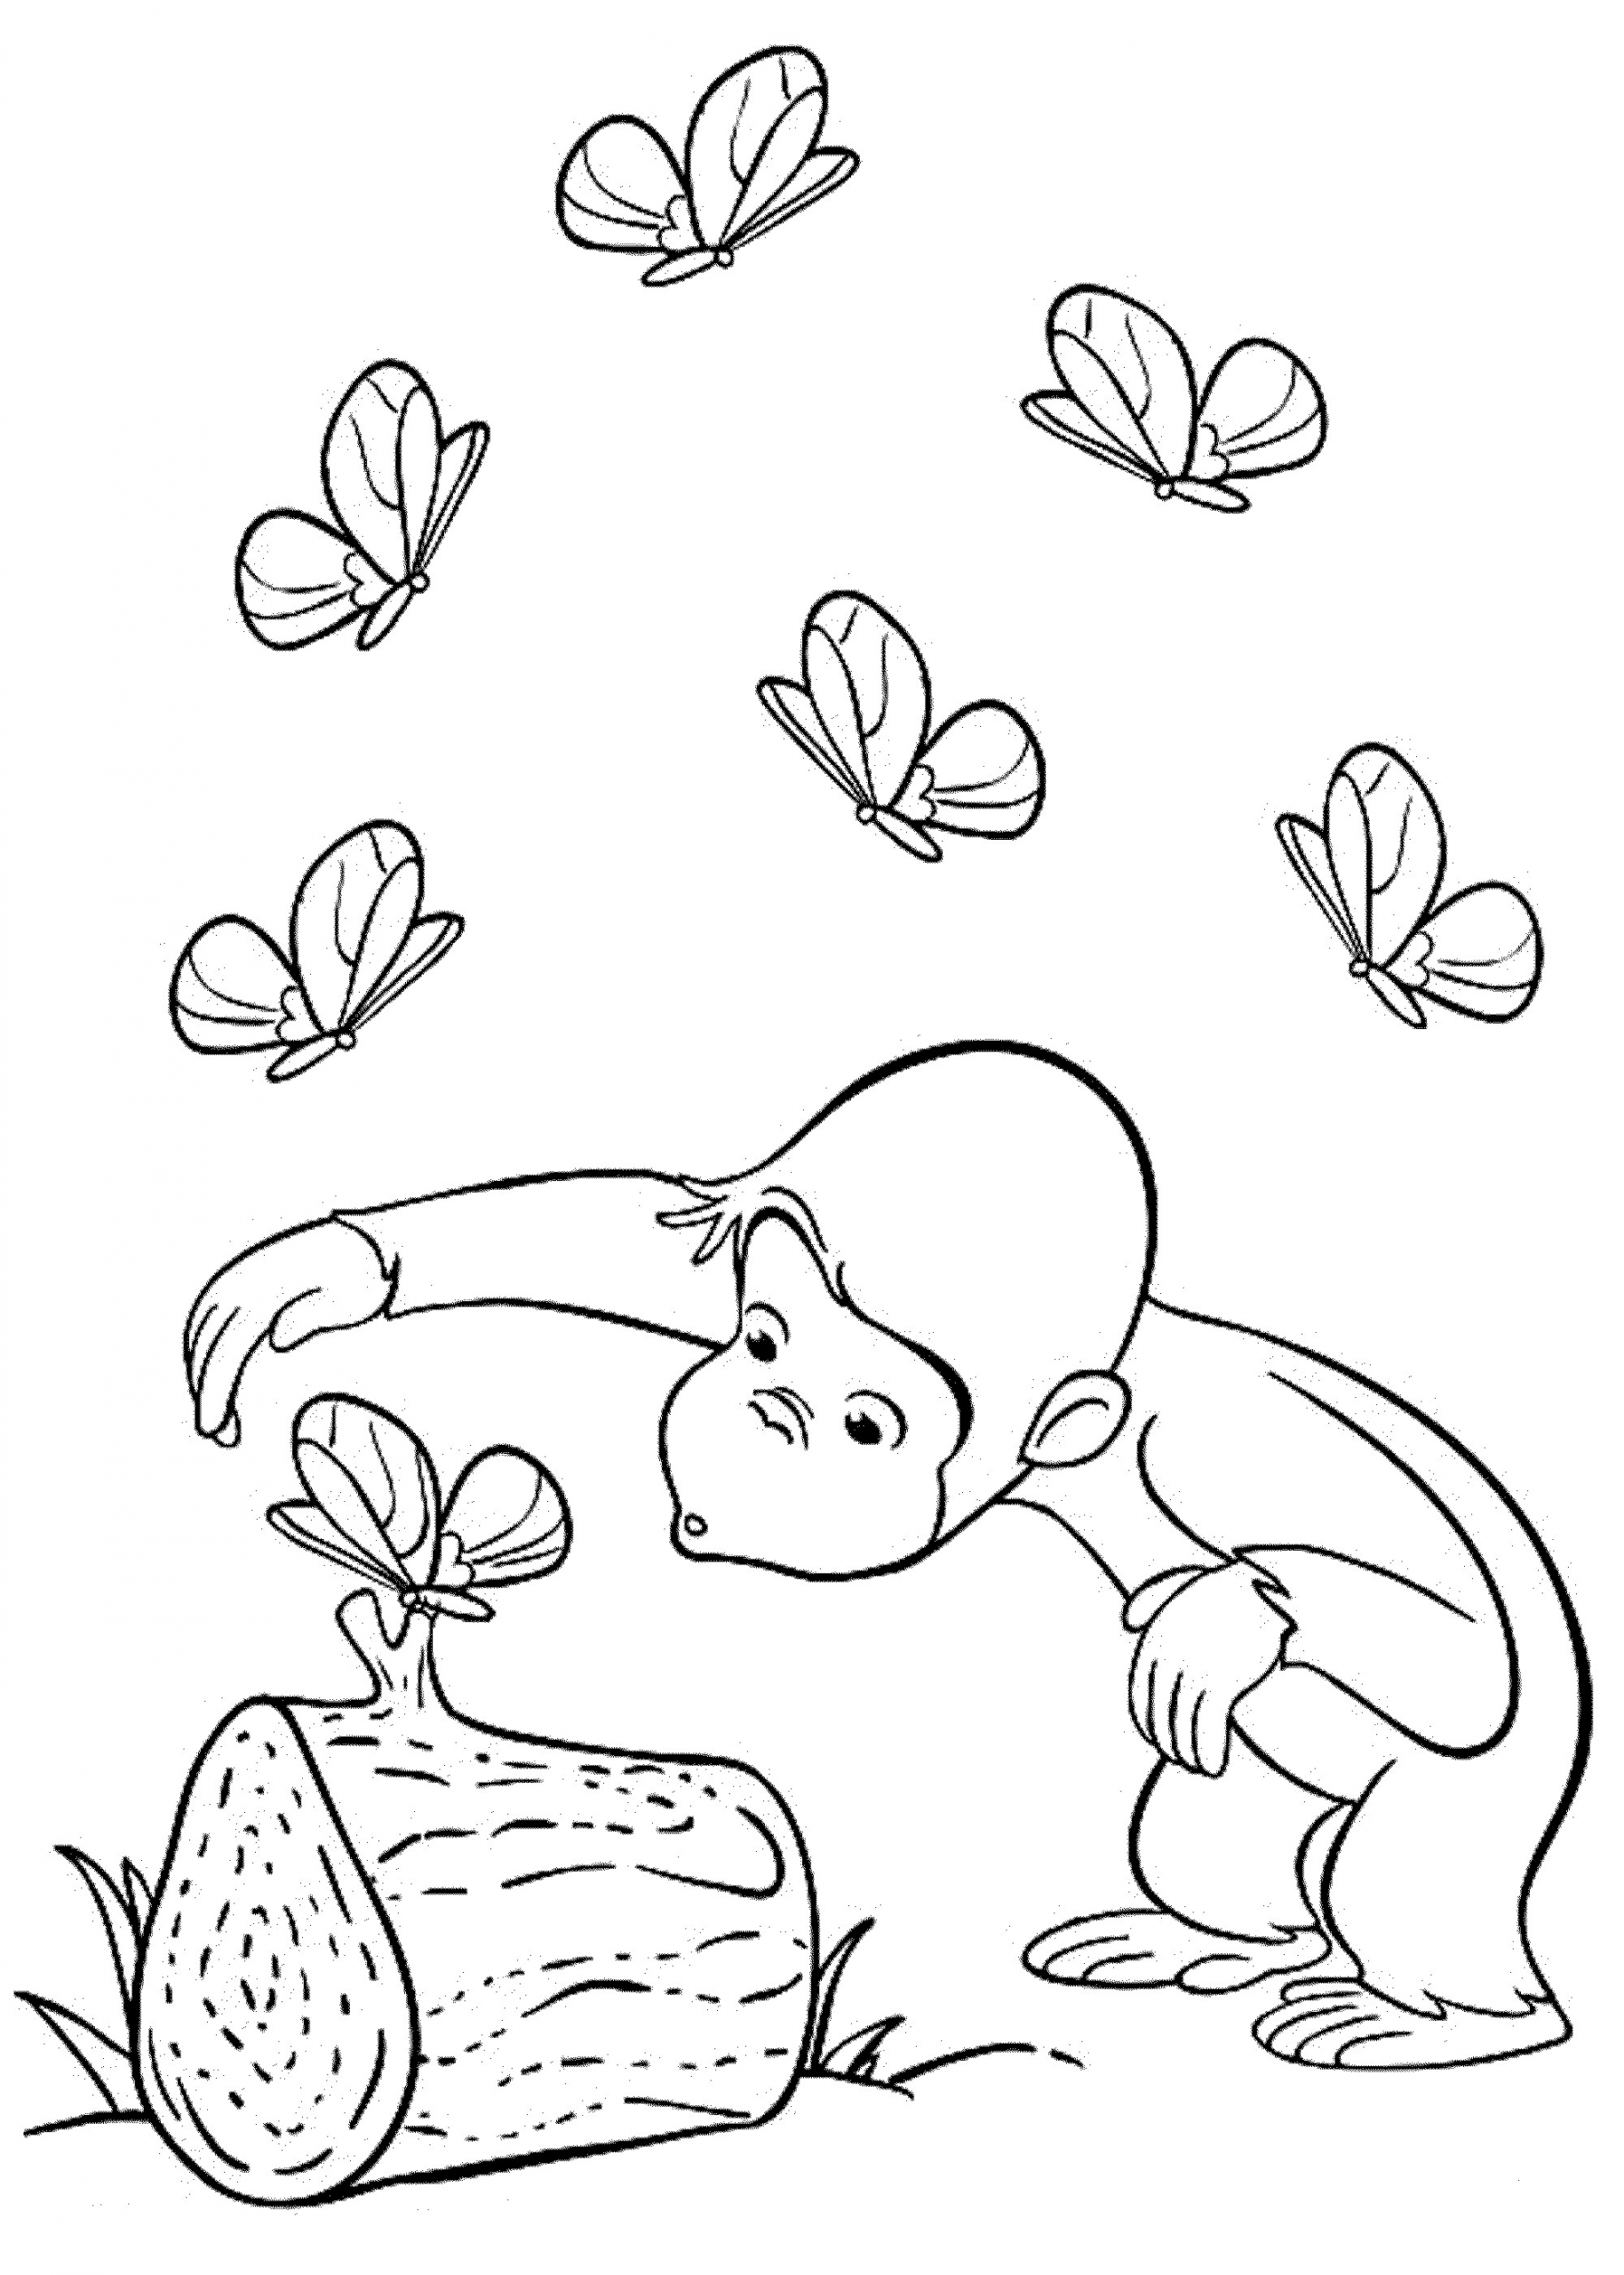 Coloring Books For Toddlers
 Curious George Coloring Pages Best Coloring Pages For Kids